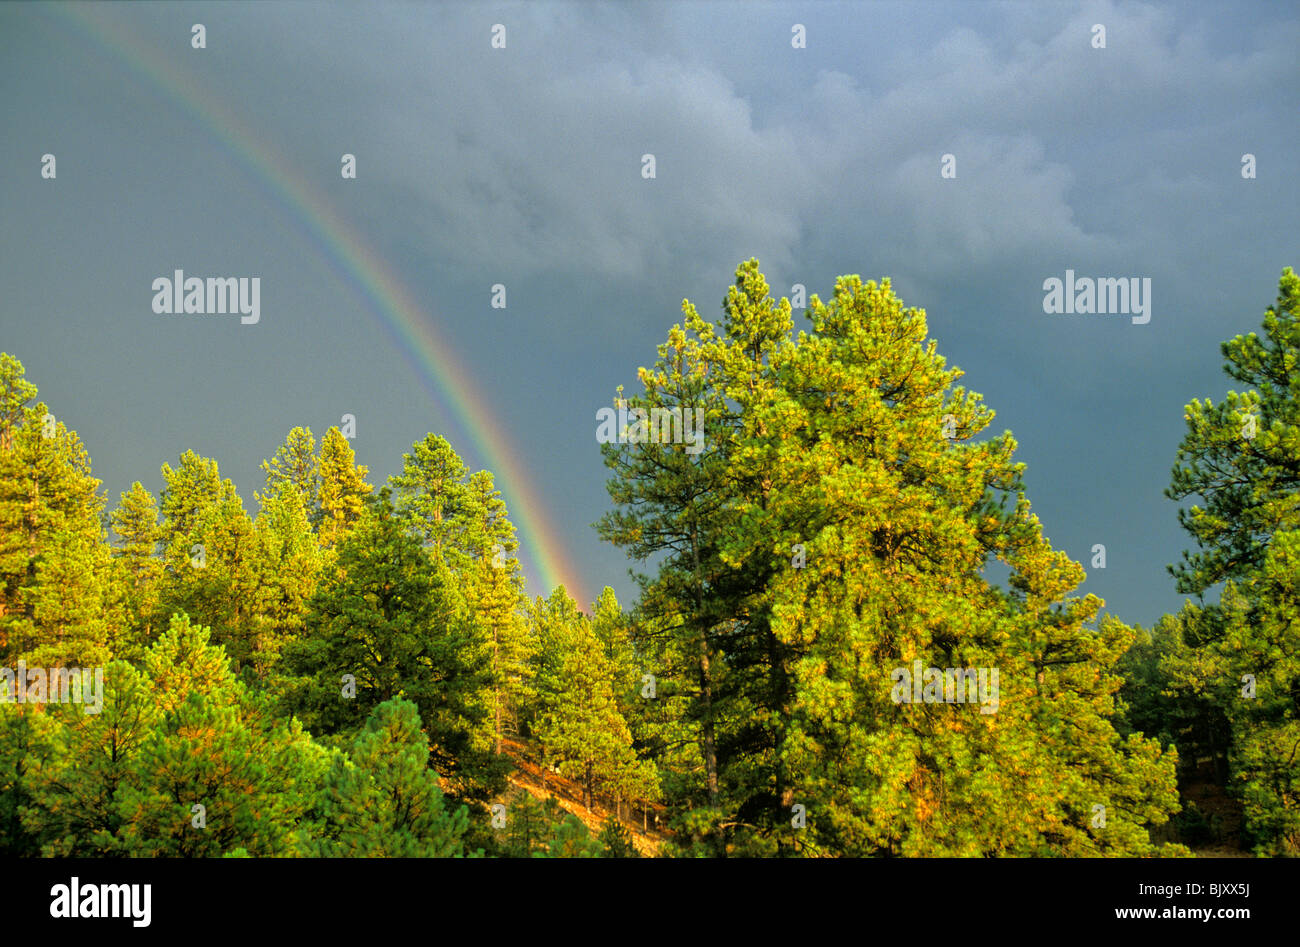 Rainbow over ponderosa pine forest after summer thunderstorm, Coconino National Forest, Flagstaff, Arizona, USA Stock Photo